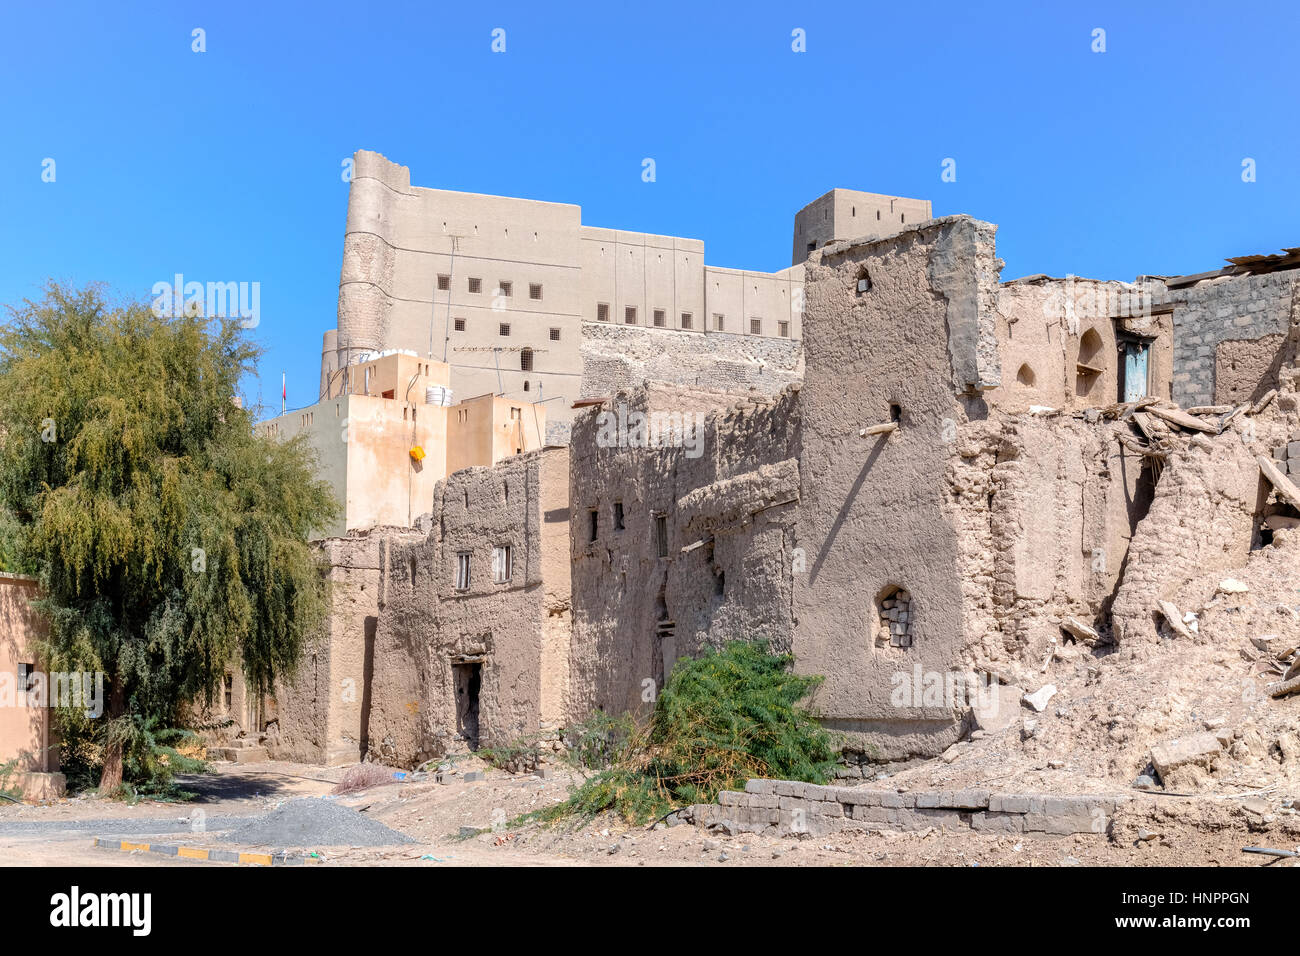 Bahla Fort, Oman, Middle East, Asia Stock Photo